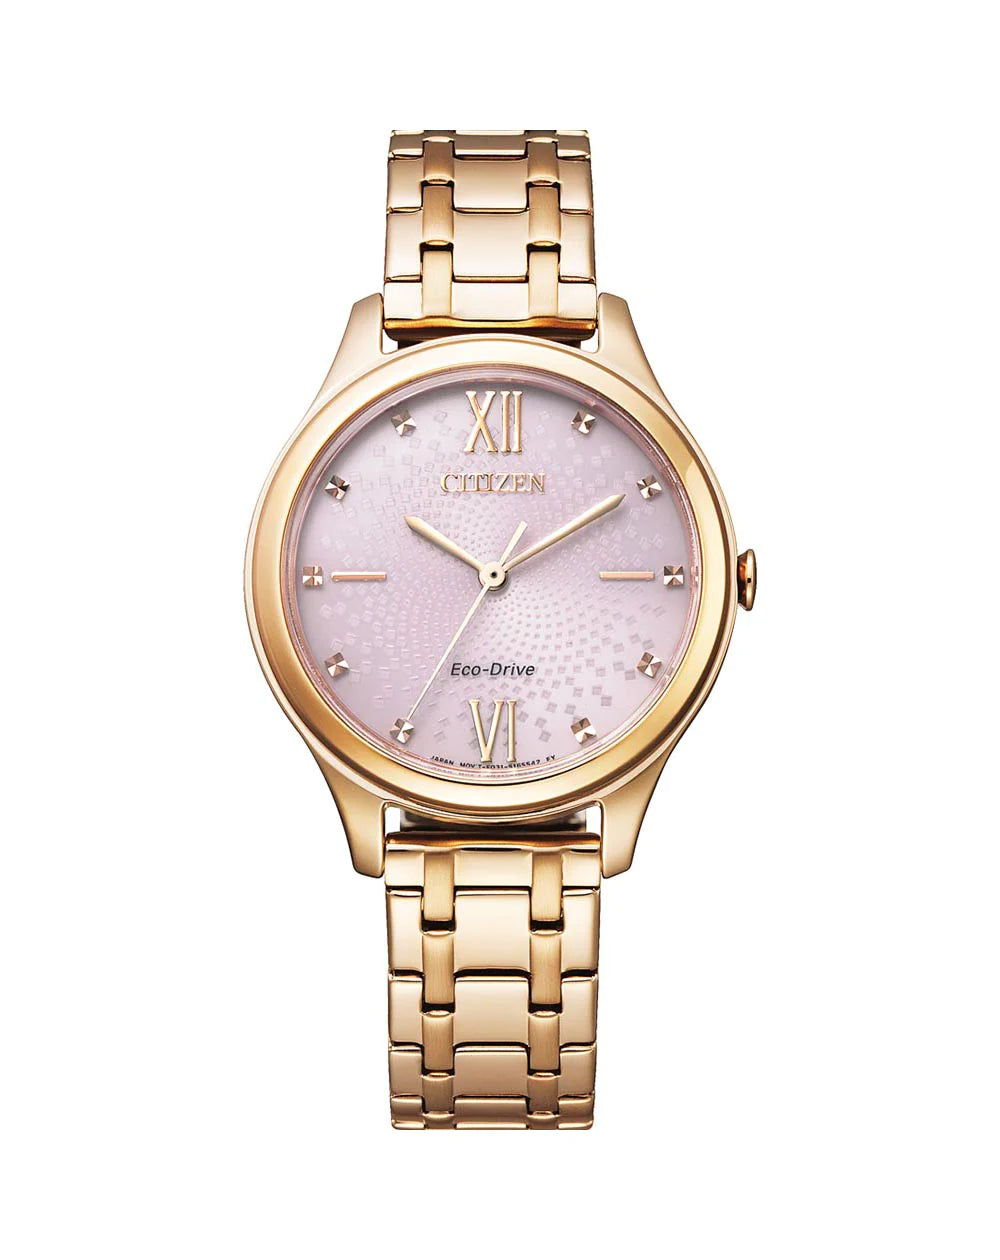 Ladies Rose Gold Citizen Eco-Drive Watch with Lavendar Dial